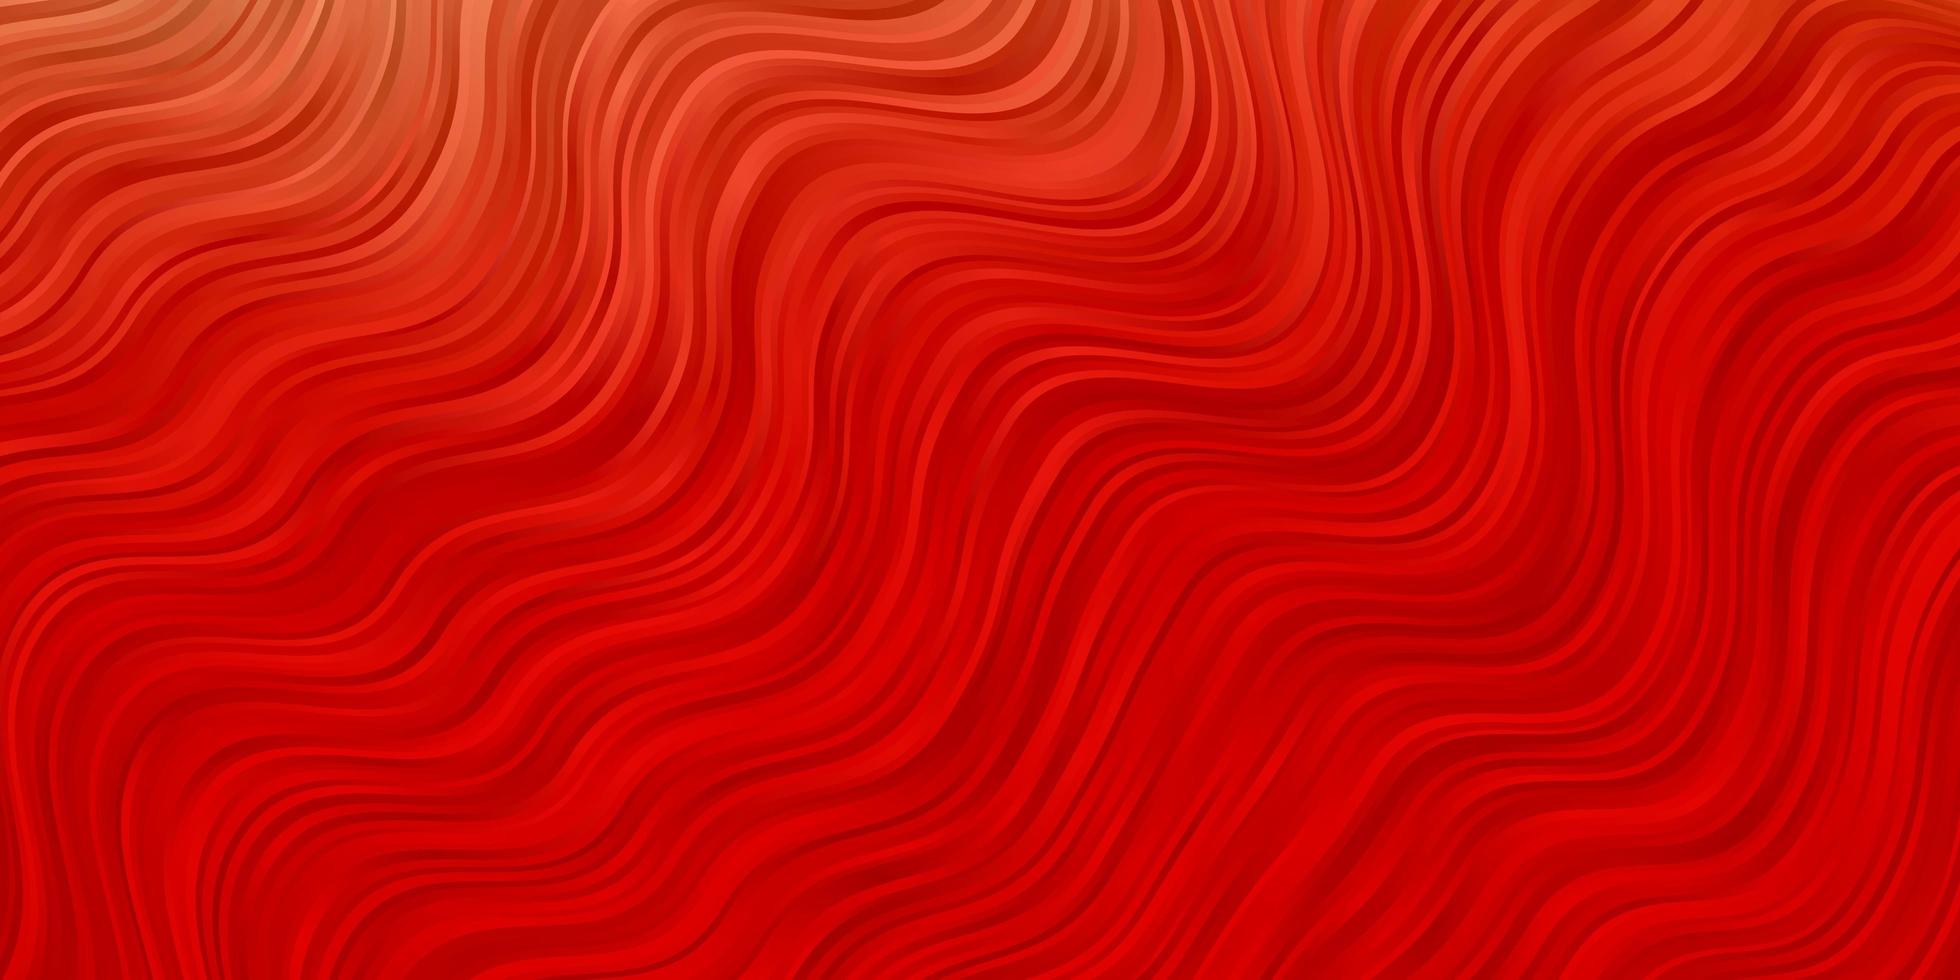 Light Red vector texture with curves.